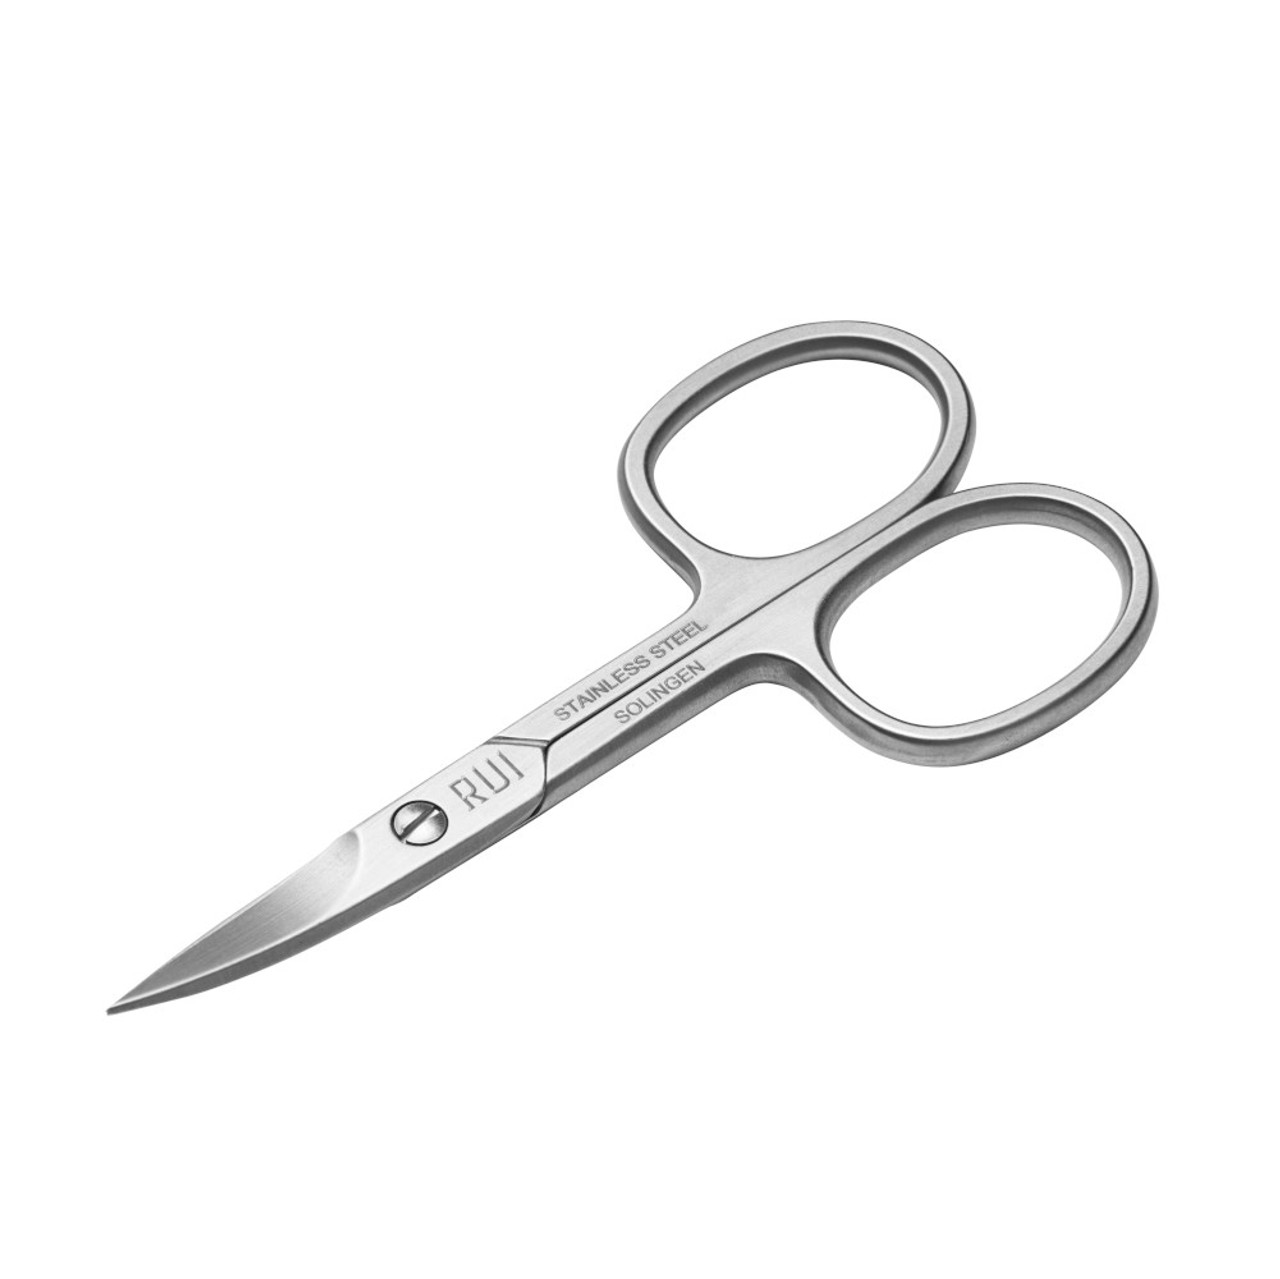 Precision Curved Blade Stainless Steel Mini-Scissors